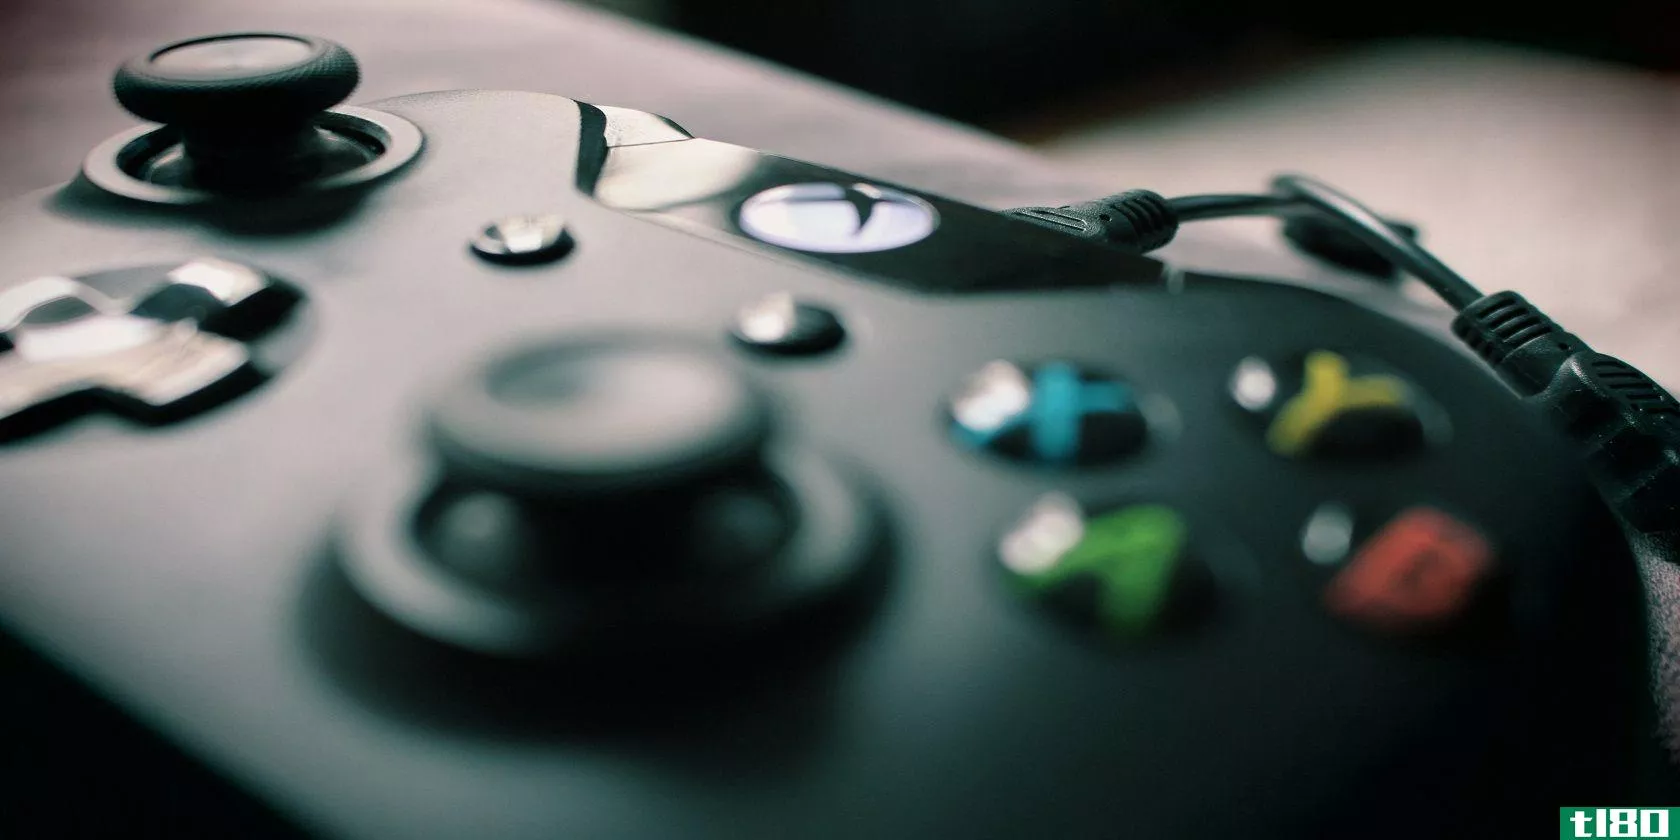 Image of an Xbox One controller